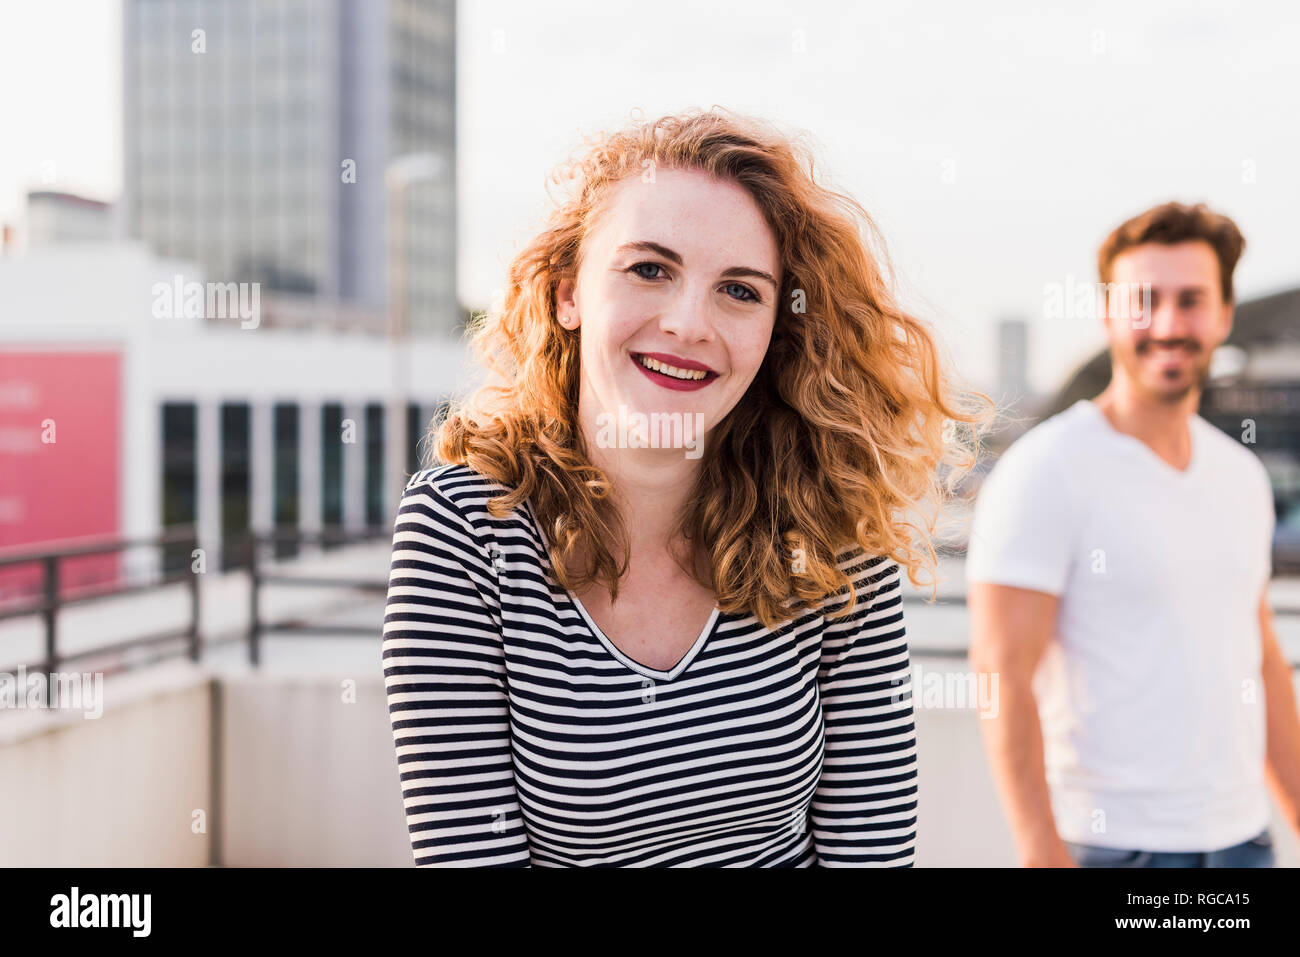 Portrait of happy young woman with boyfriend in the background at sunset Stock Photo